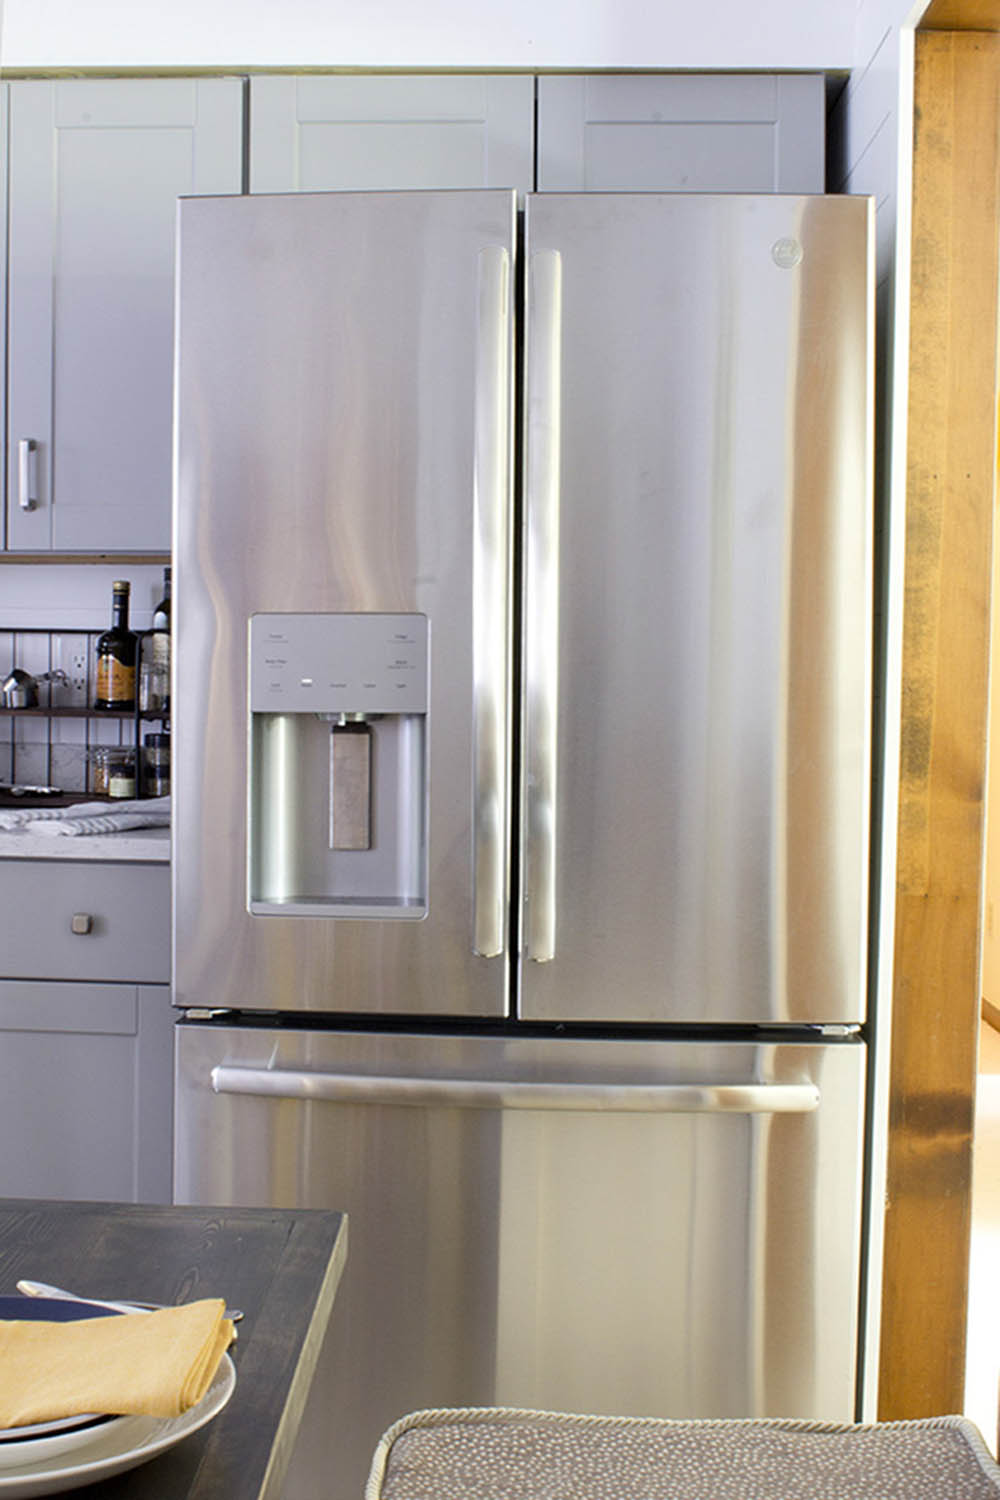 A GE stainless steel refrigerator.